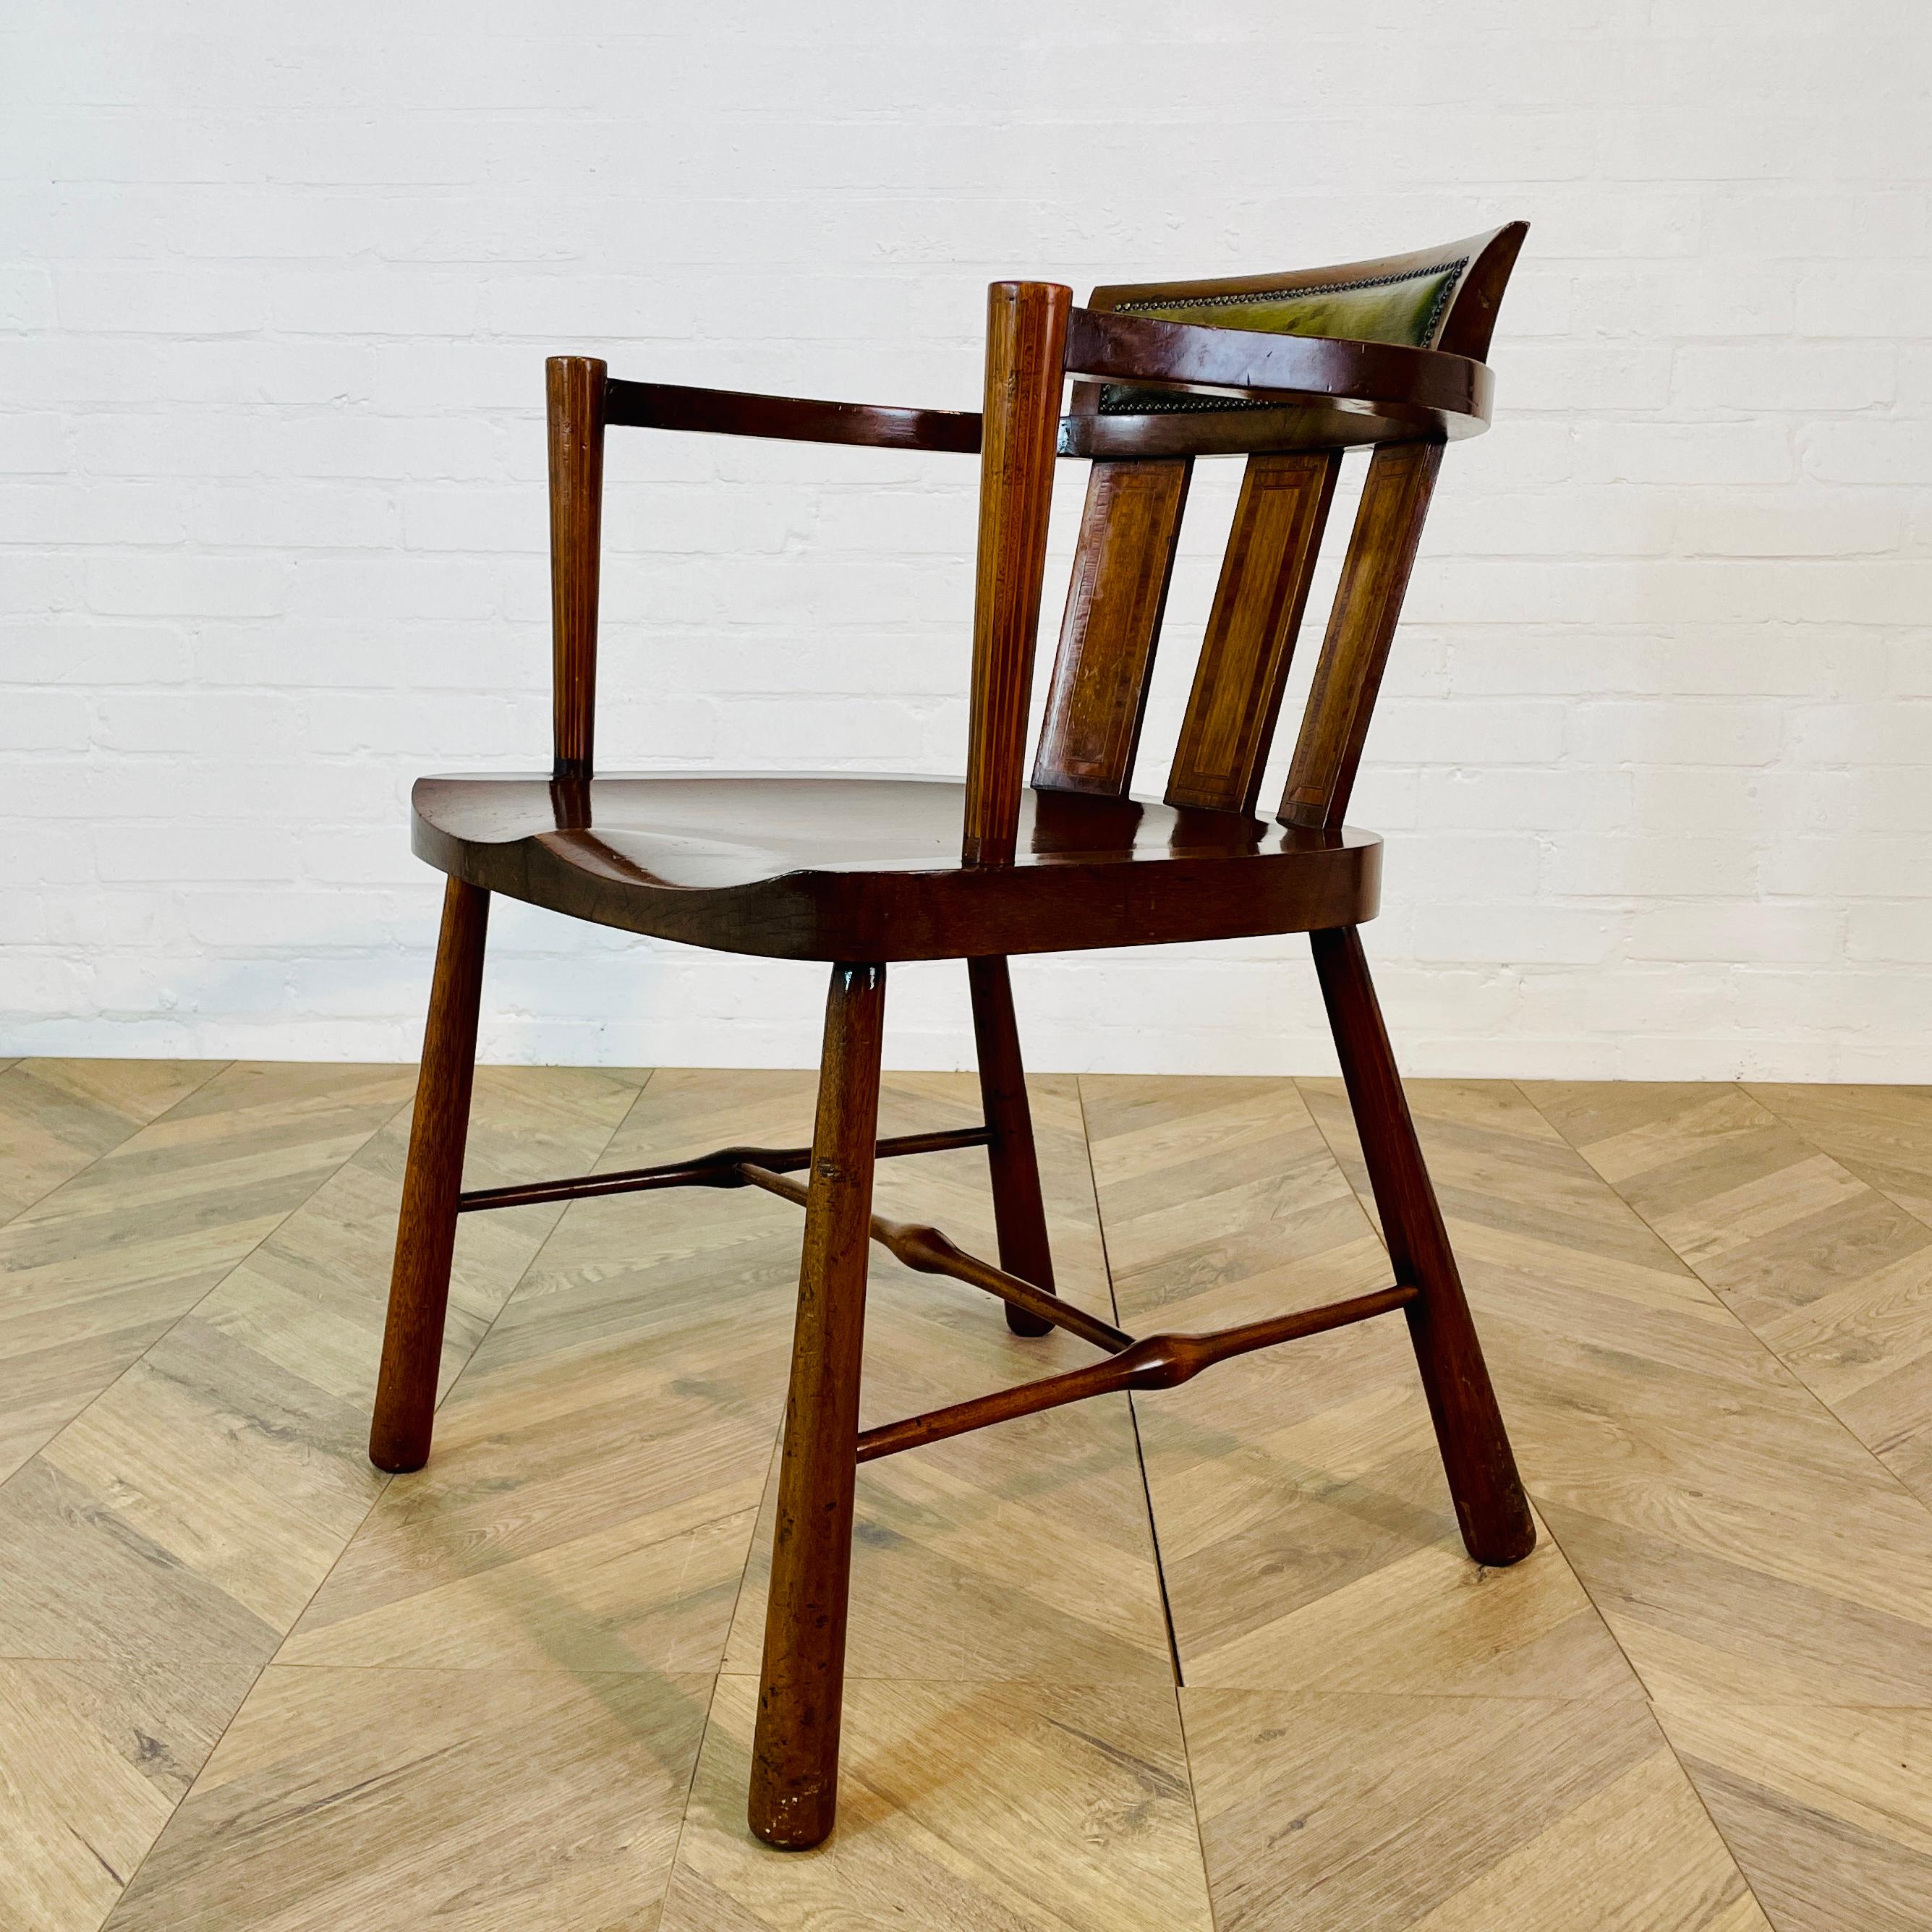 An Lovely Vintage Former Clerks Chair with Unusual Features, circa 1930s.

The chair is structurally strong and in good vintage condition, with only minor scuffs and marks, in-keeping with its age and usage. 

It features oak frame with fluted arms